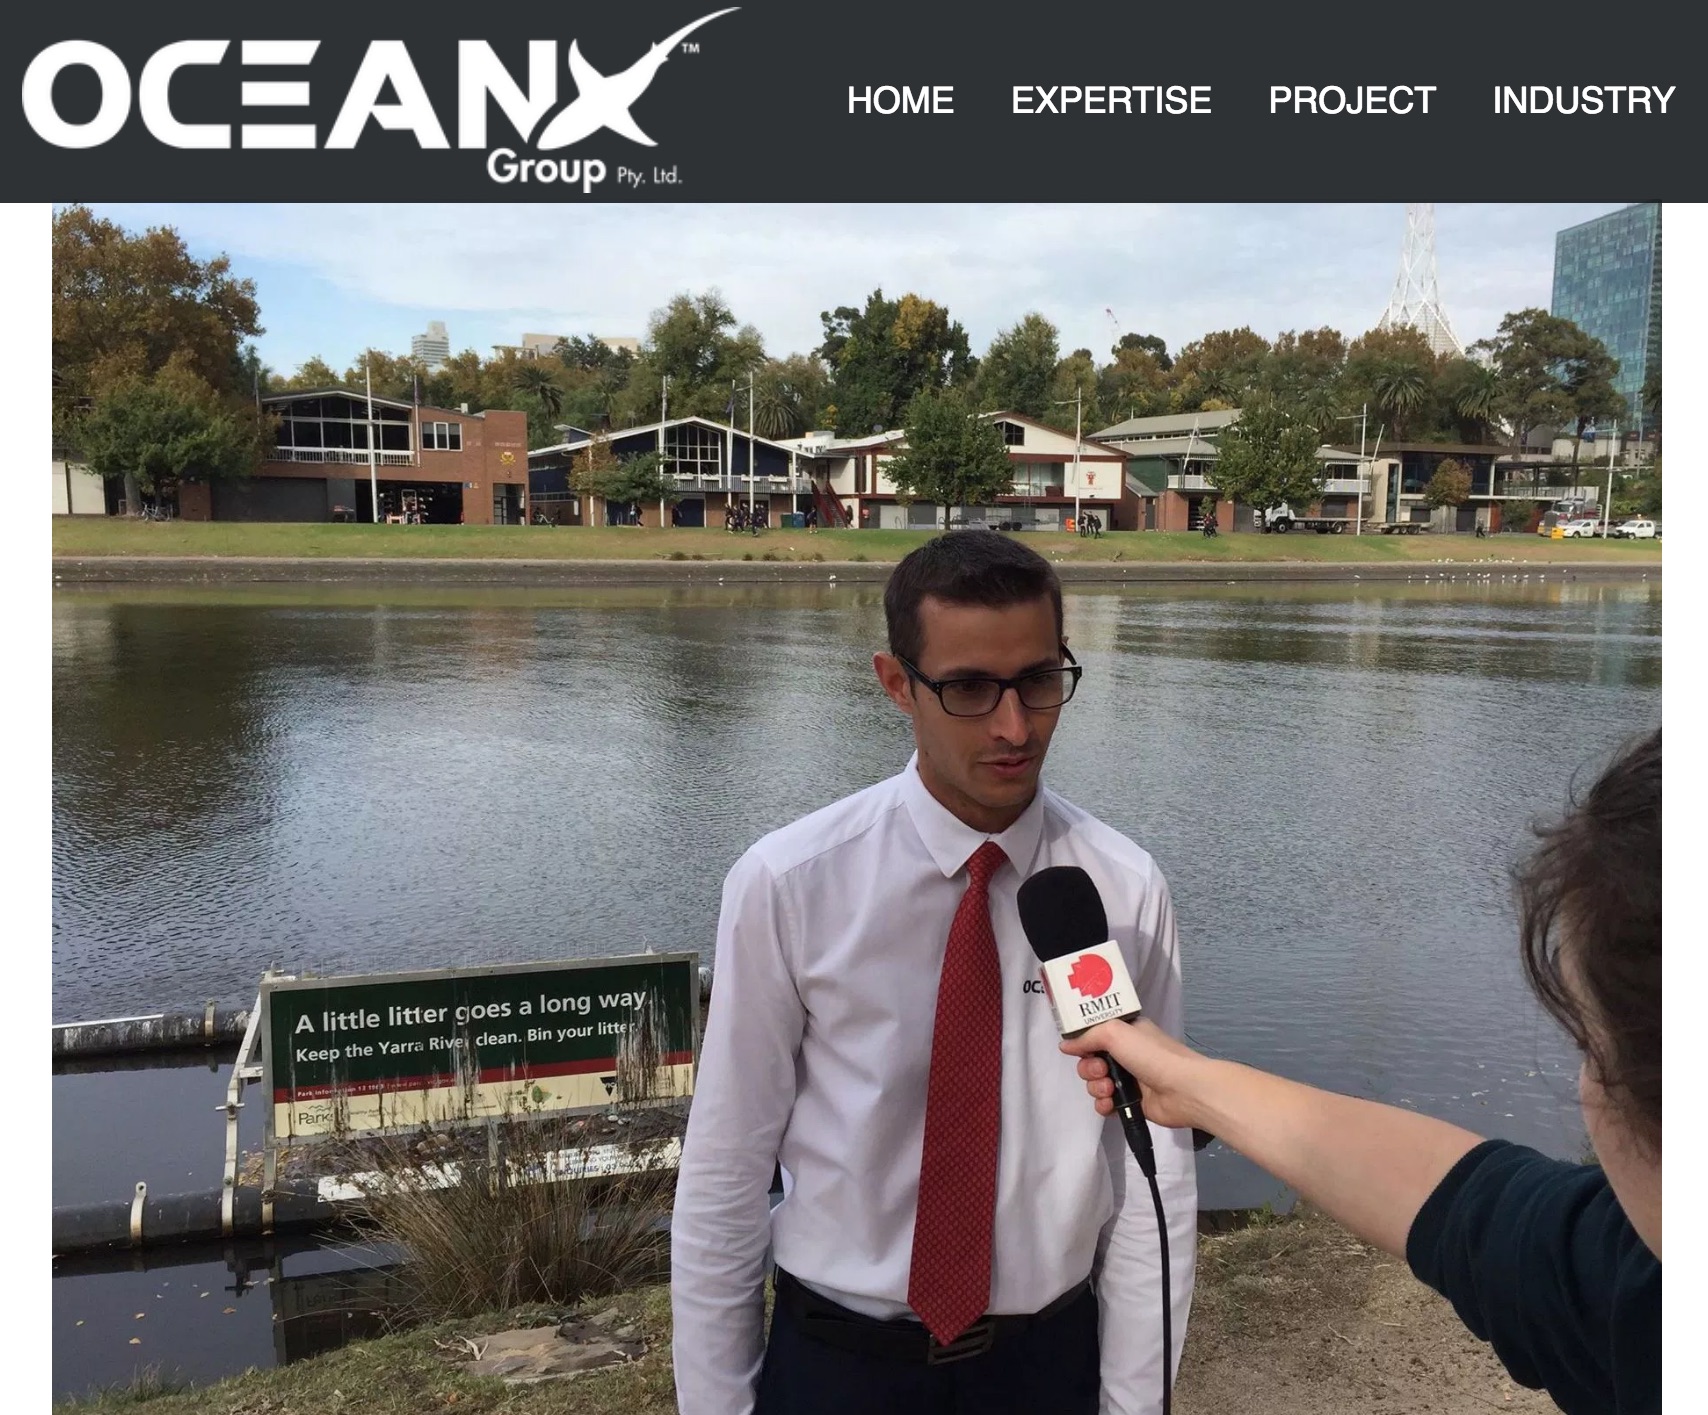 Ludovic Grosjean Interview in the City Journal Video News - Innovative technology used to protect the environment